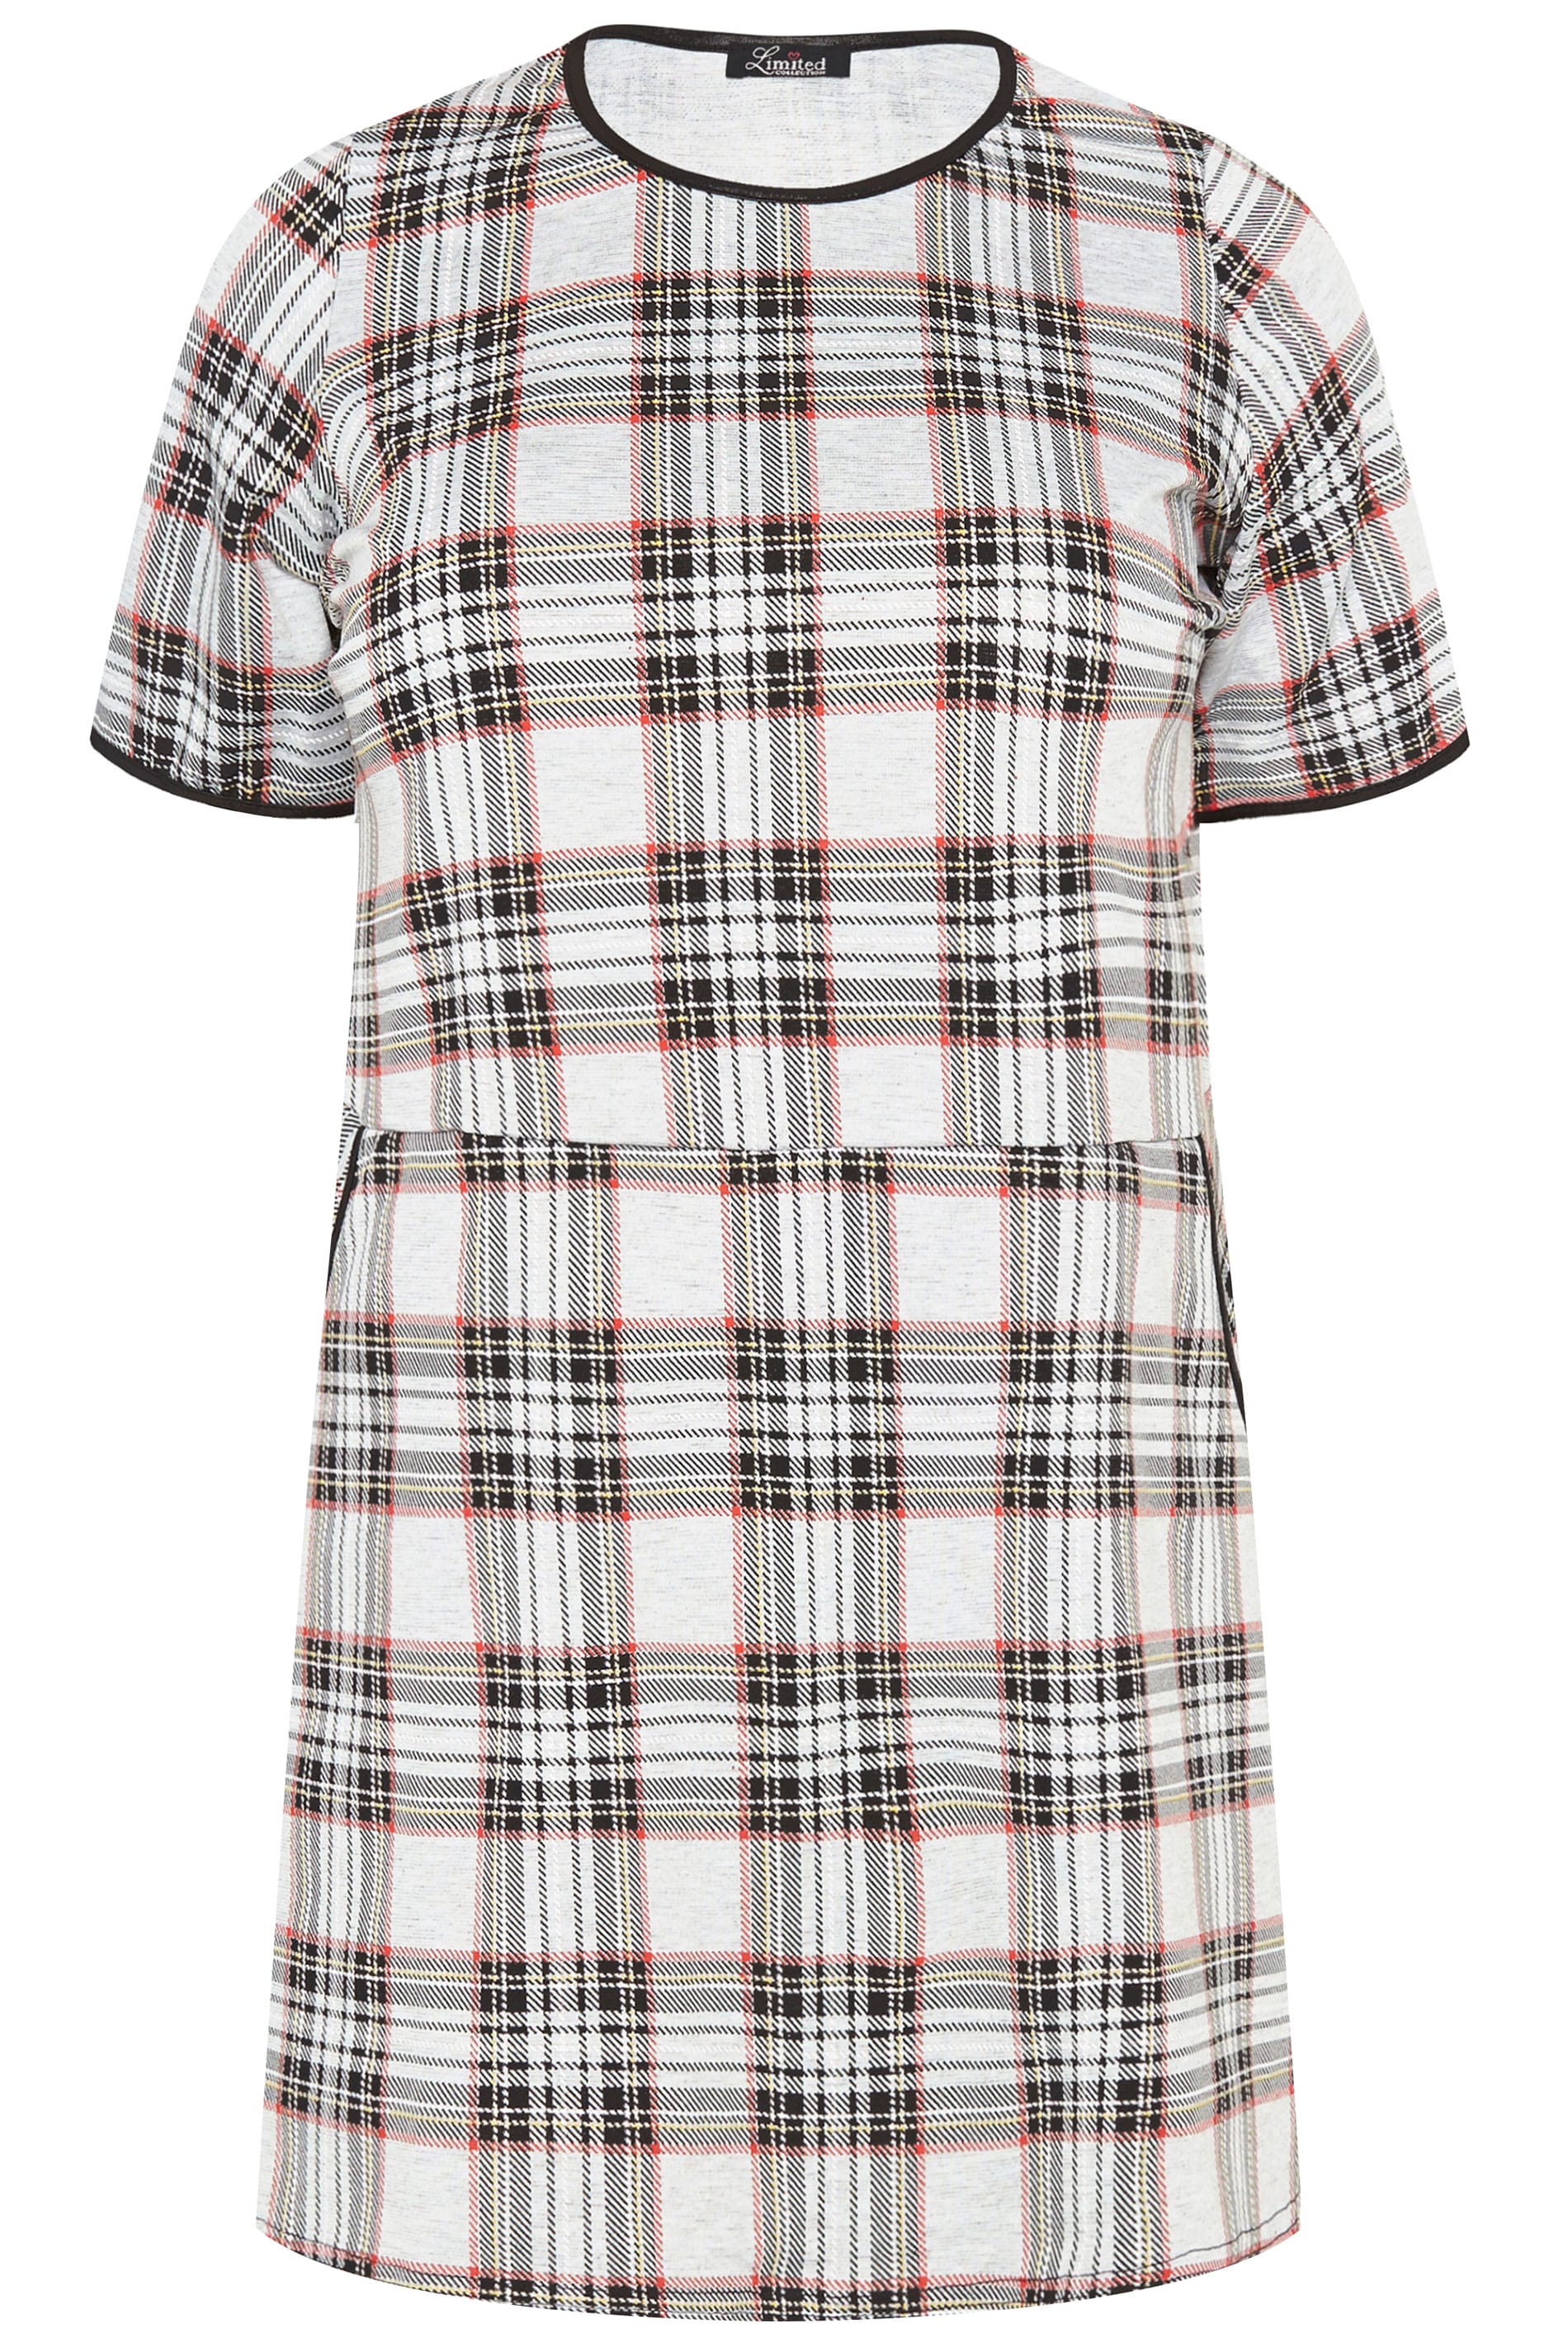 LIMITED COLLECTION Grey Check Tunic Top | Plus Sizes 16 to 36 | Yours ...